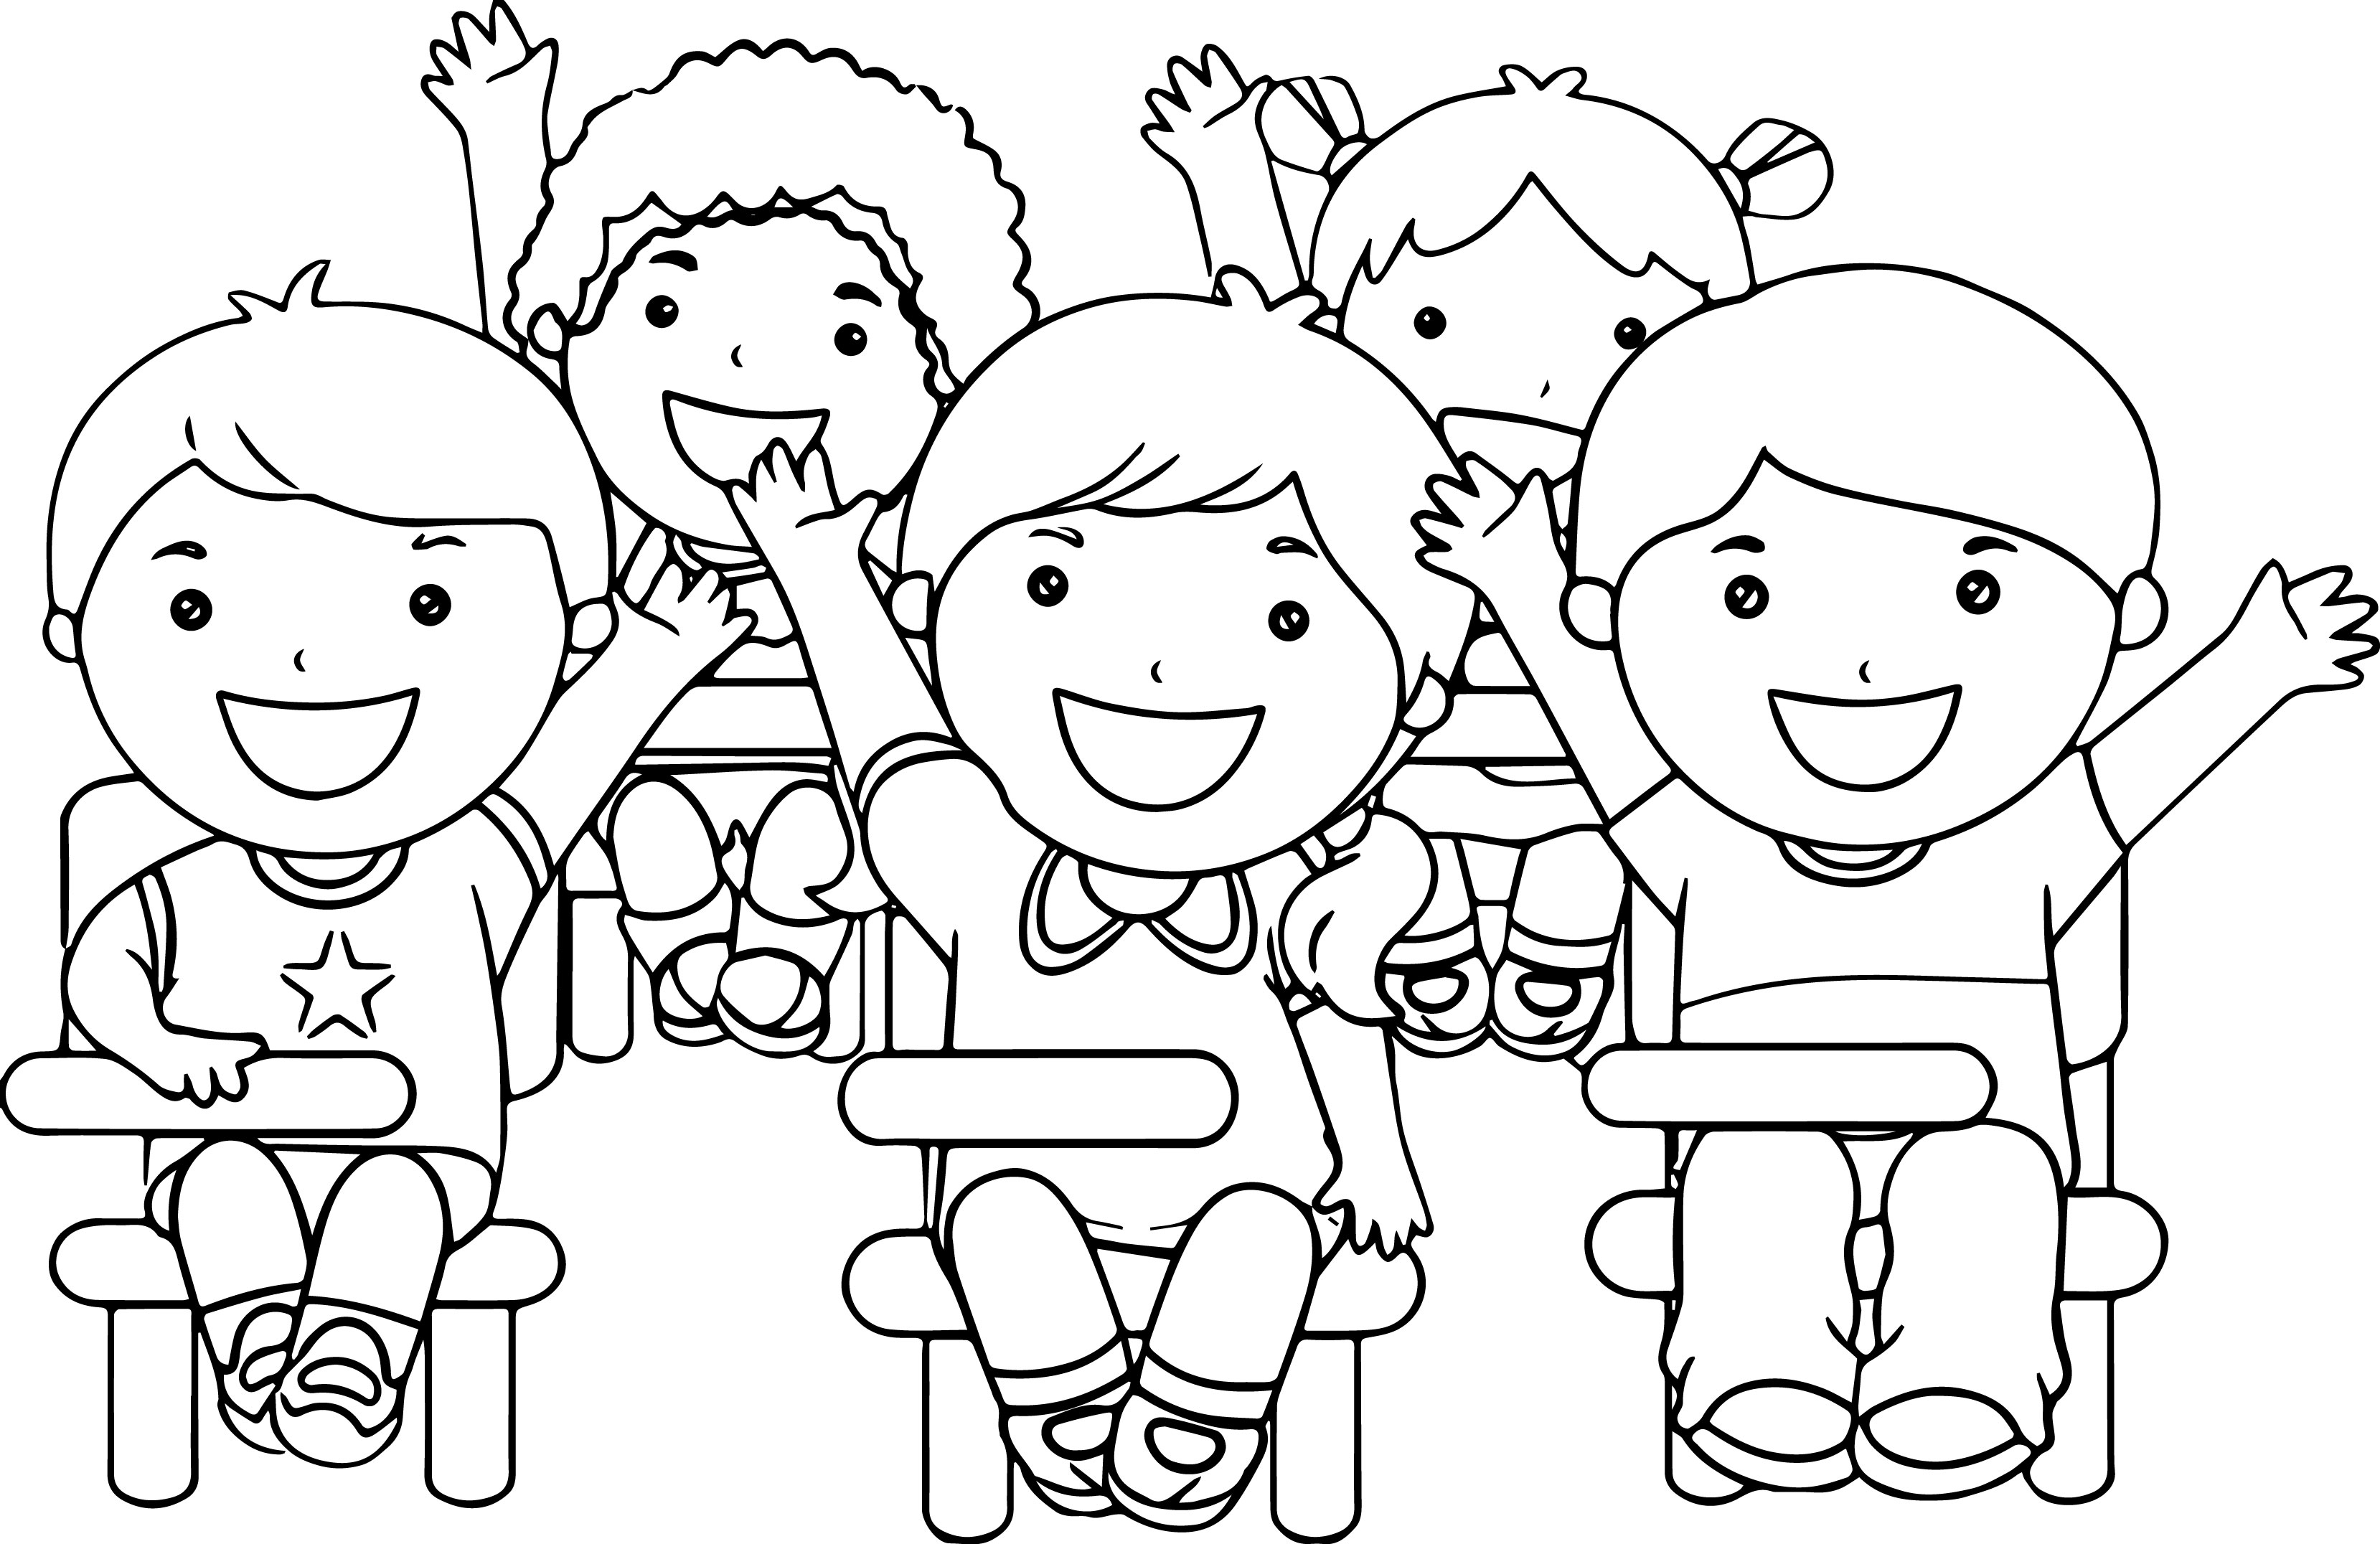 Easy Coloring Pages For School Age